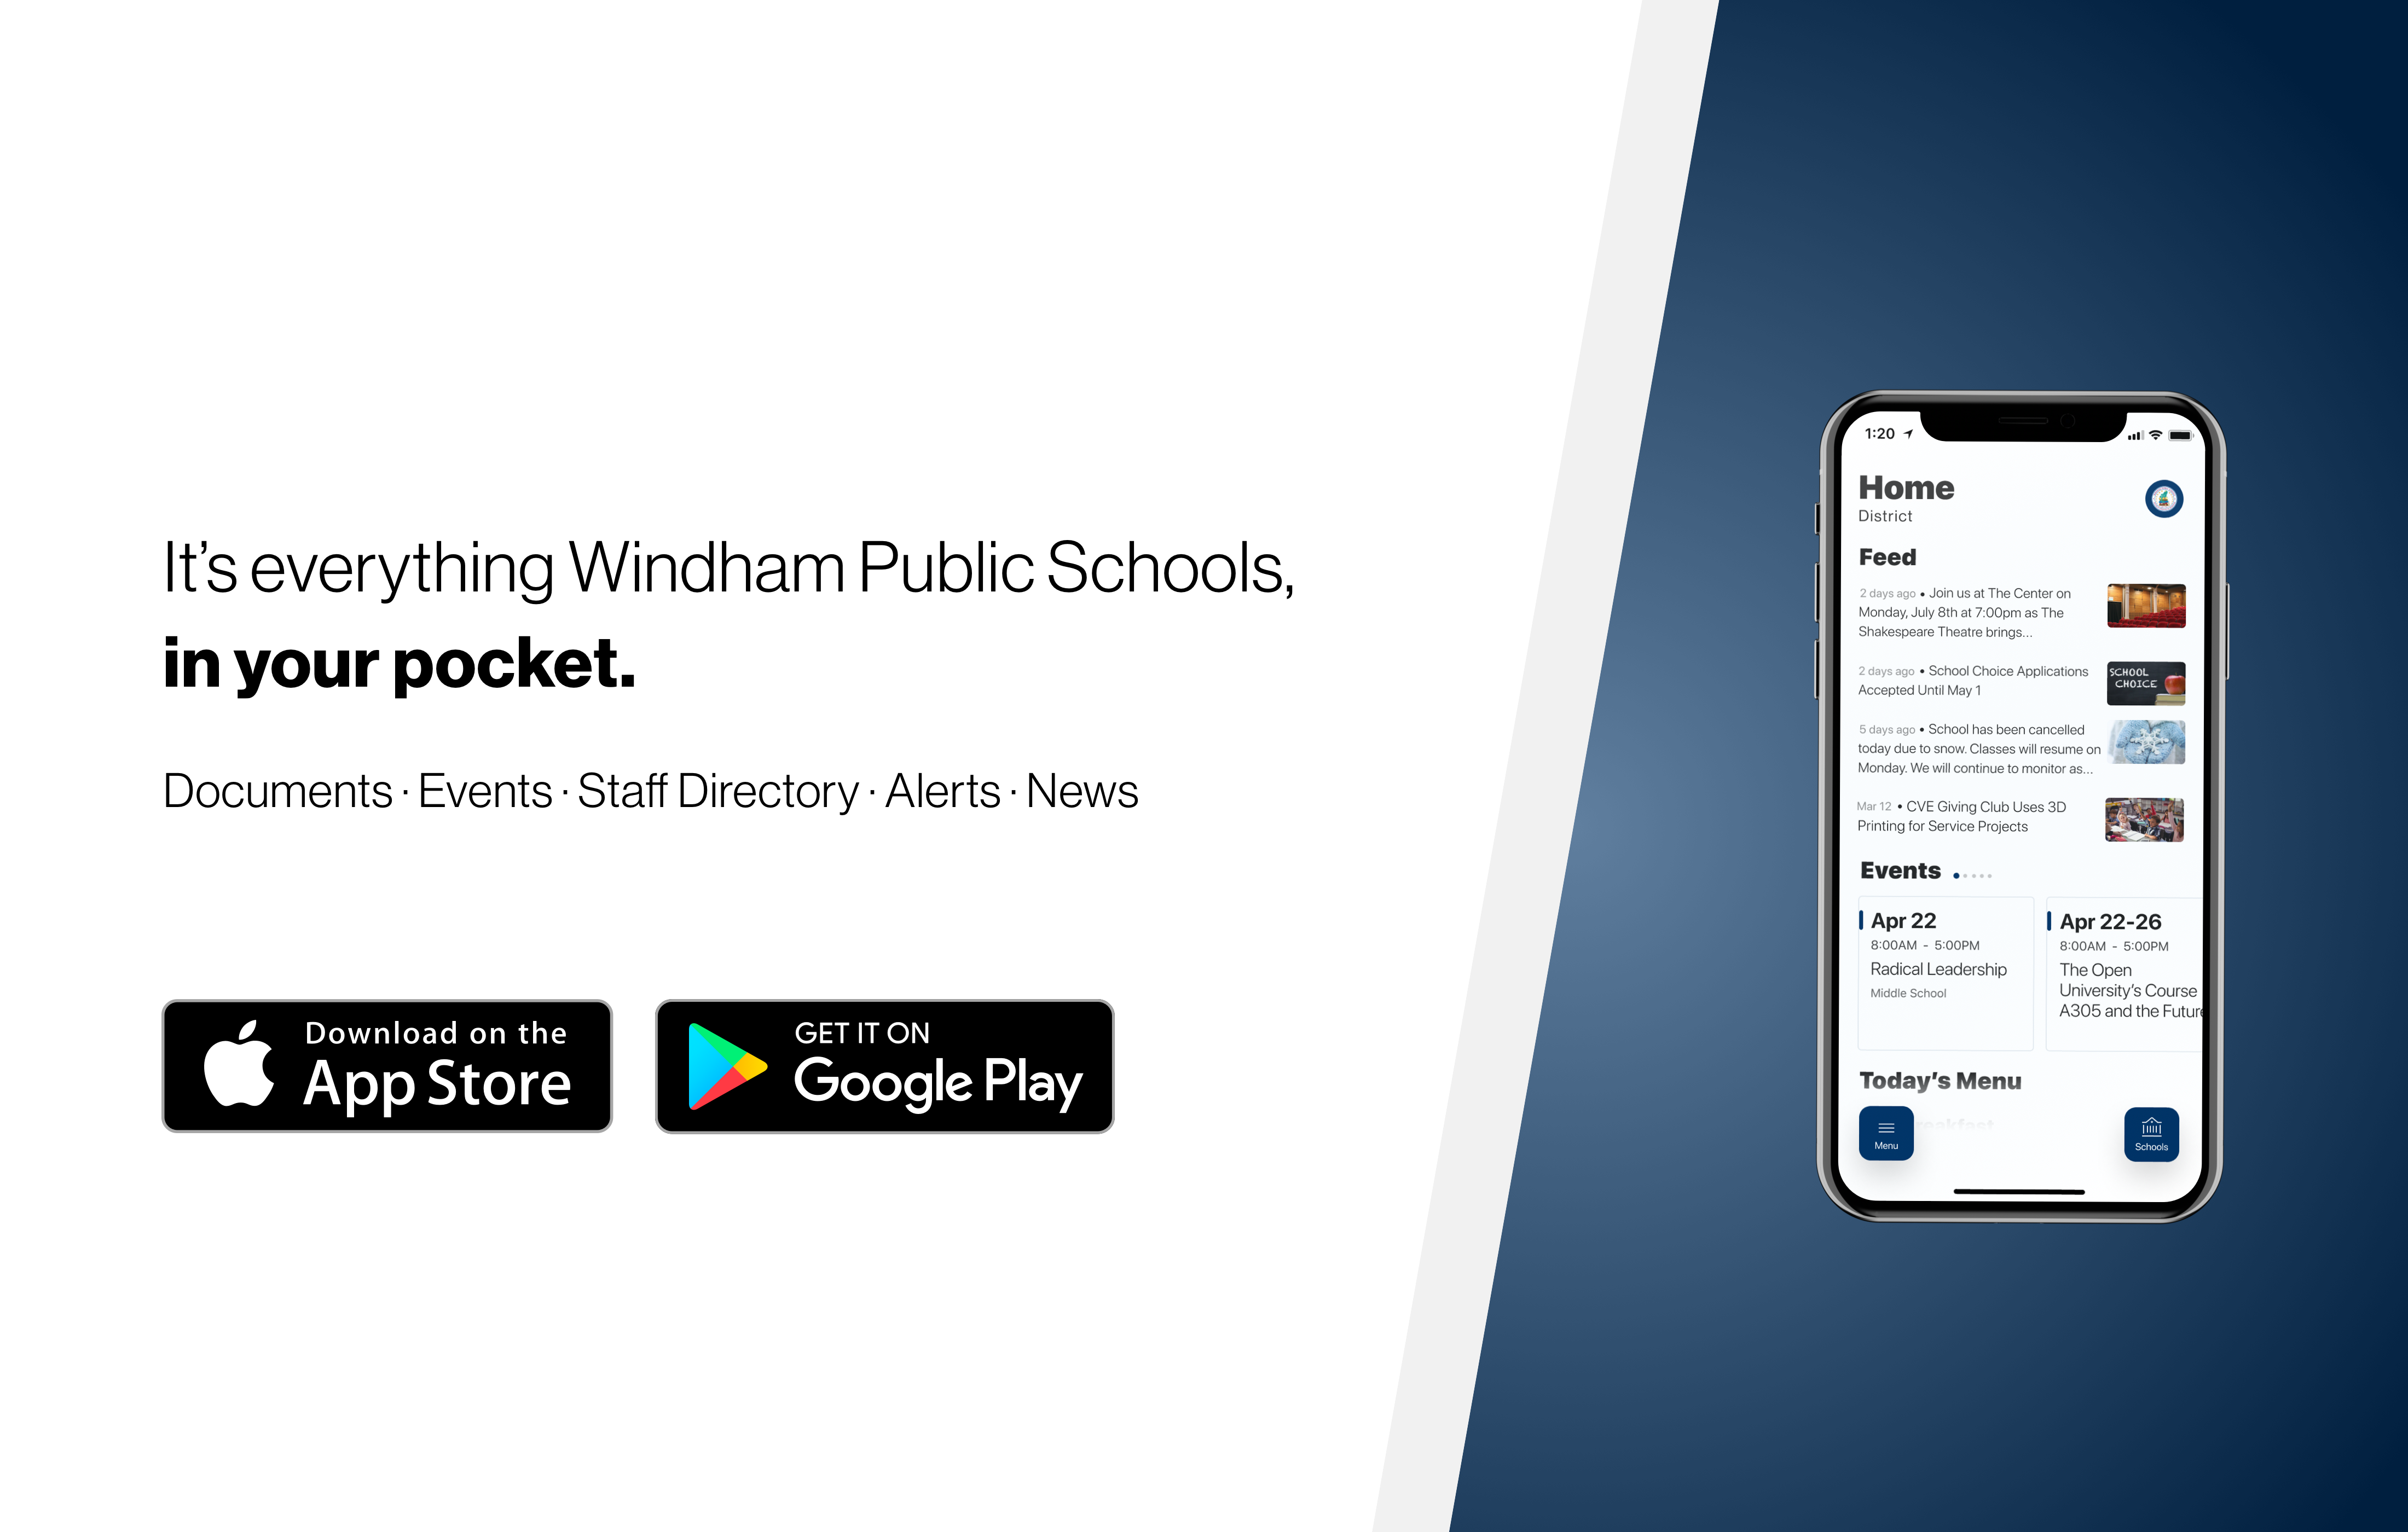 An. advertisement for the new school app